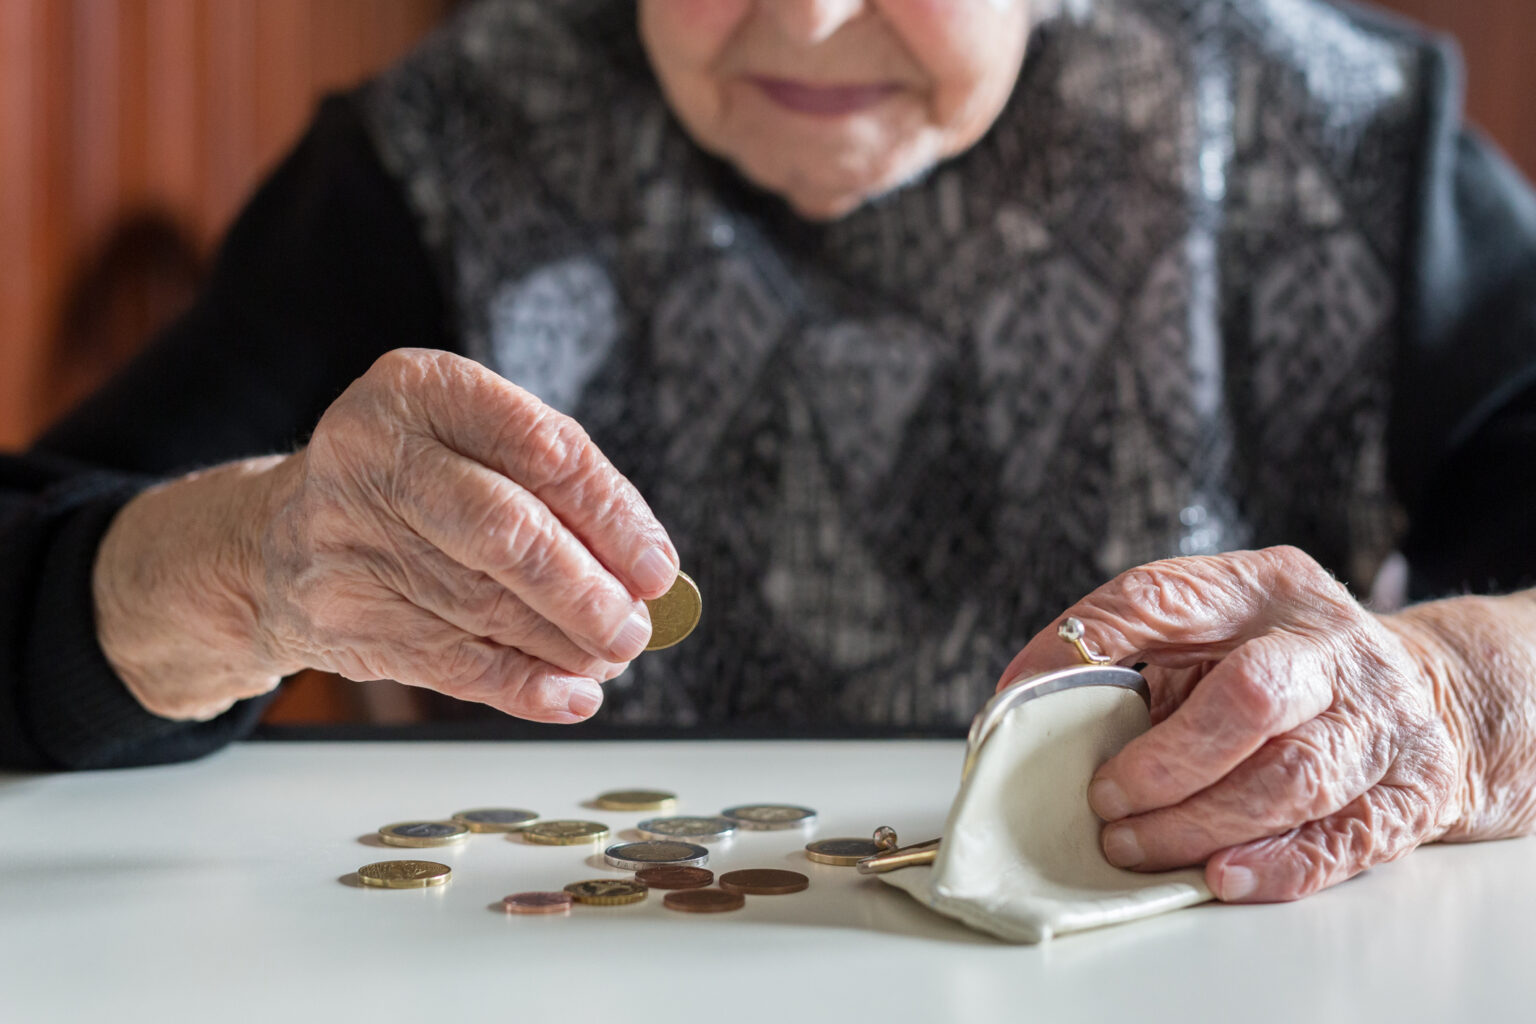 Elderly Person Counting Change.jpg